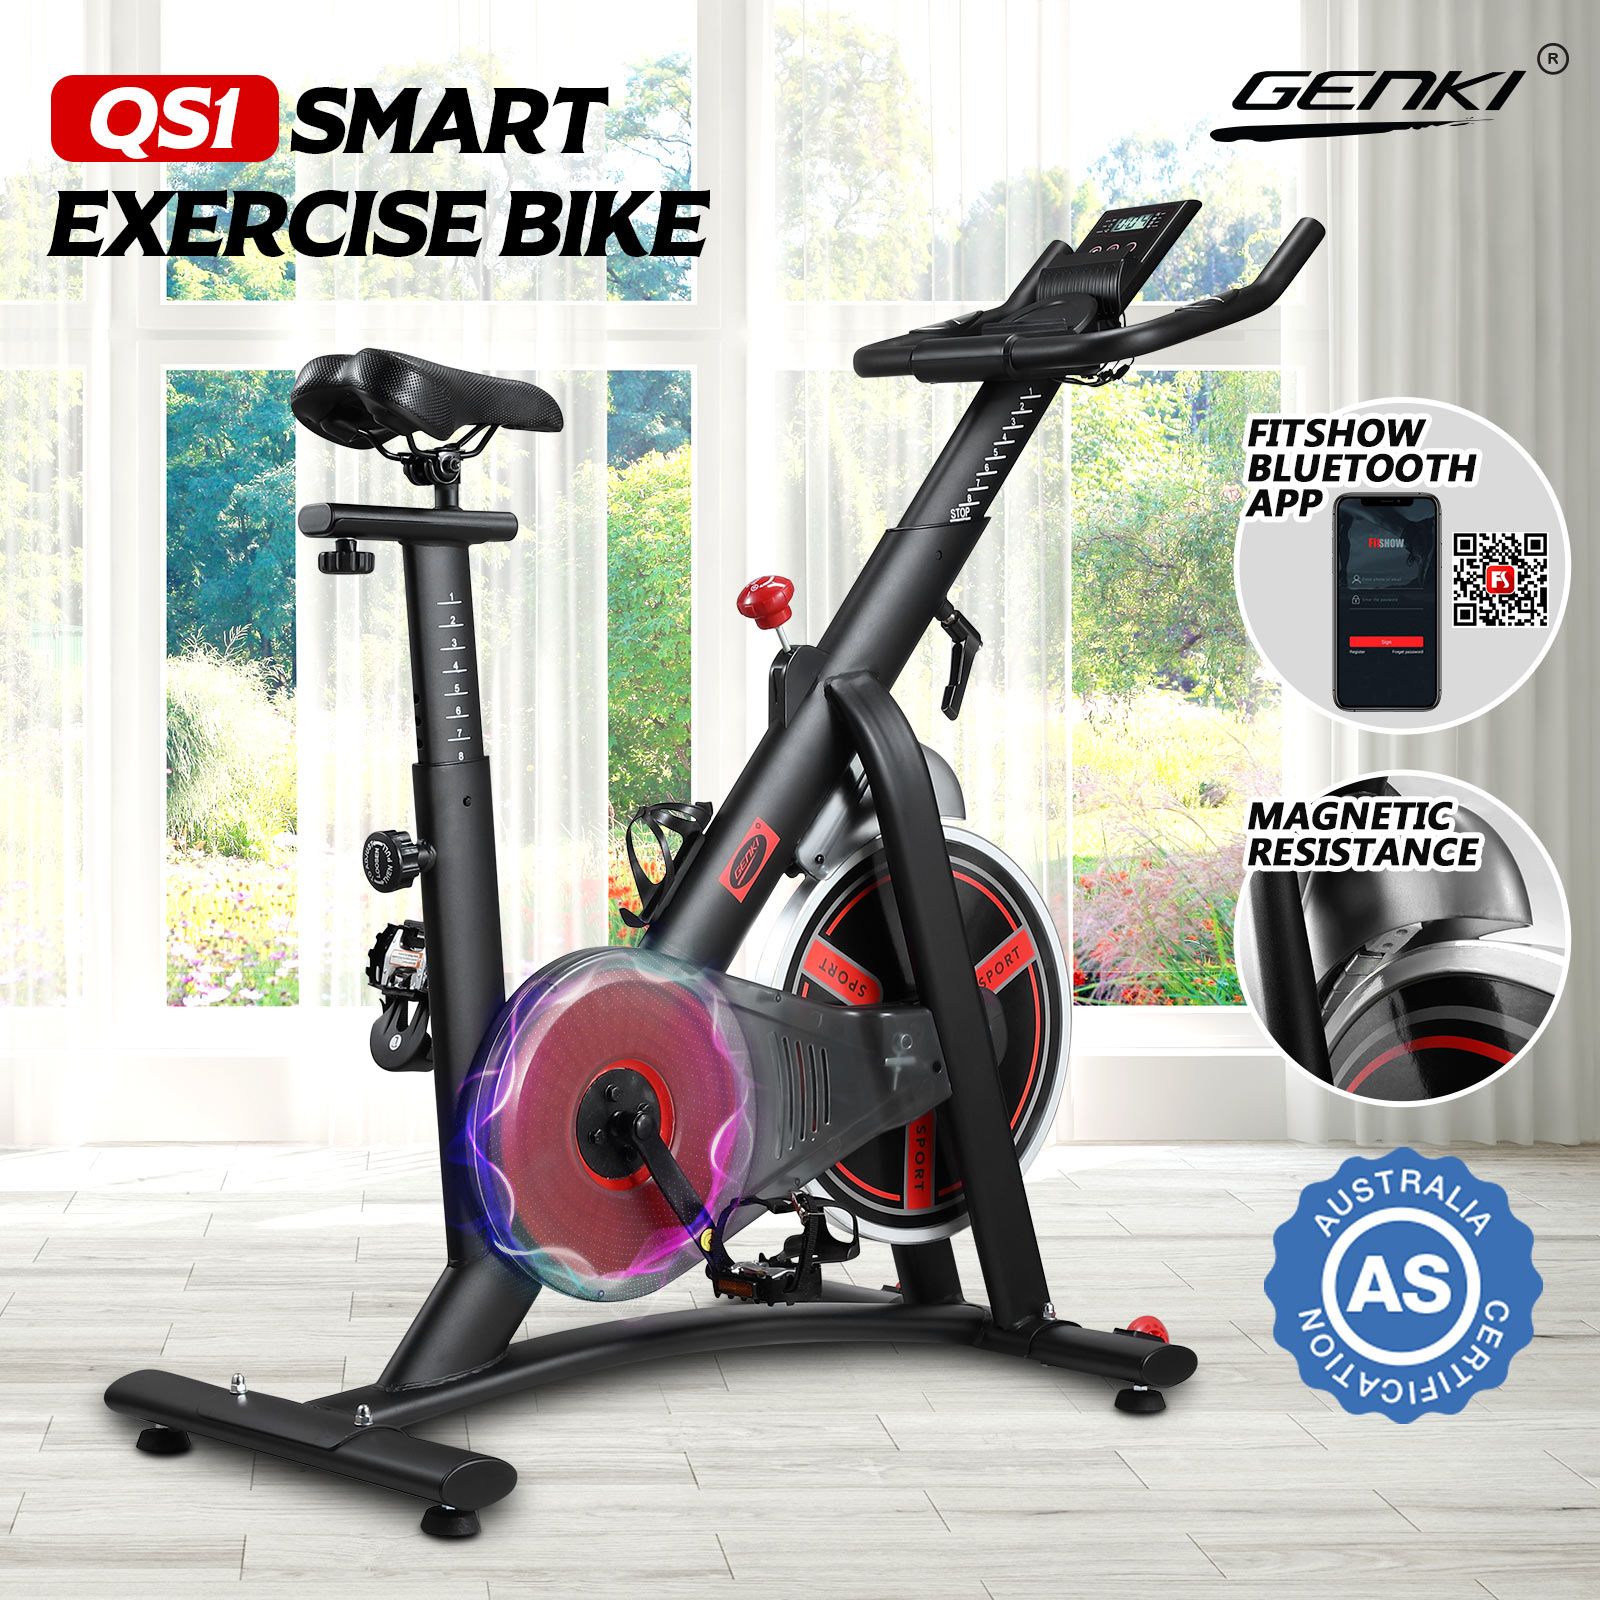 Genki Exercise Spin Magnetic Bike Indoor Stationary Bicycle Belt Drive Fitness Machine Resistance Bluetooth App FitShow